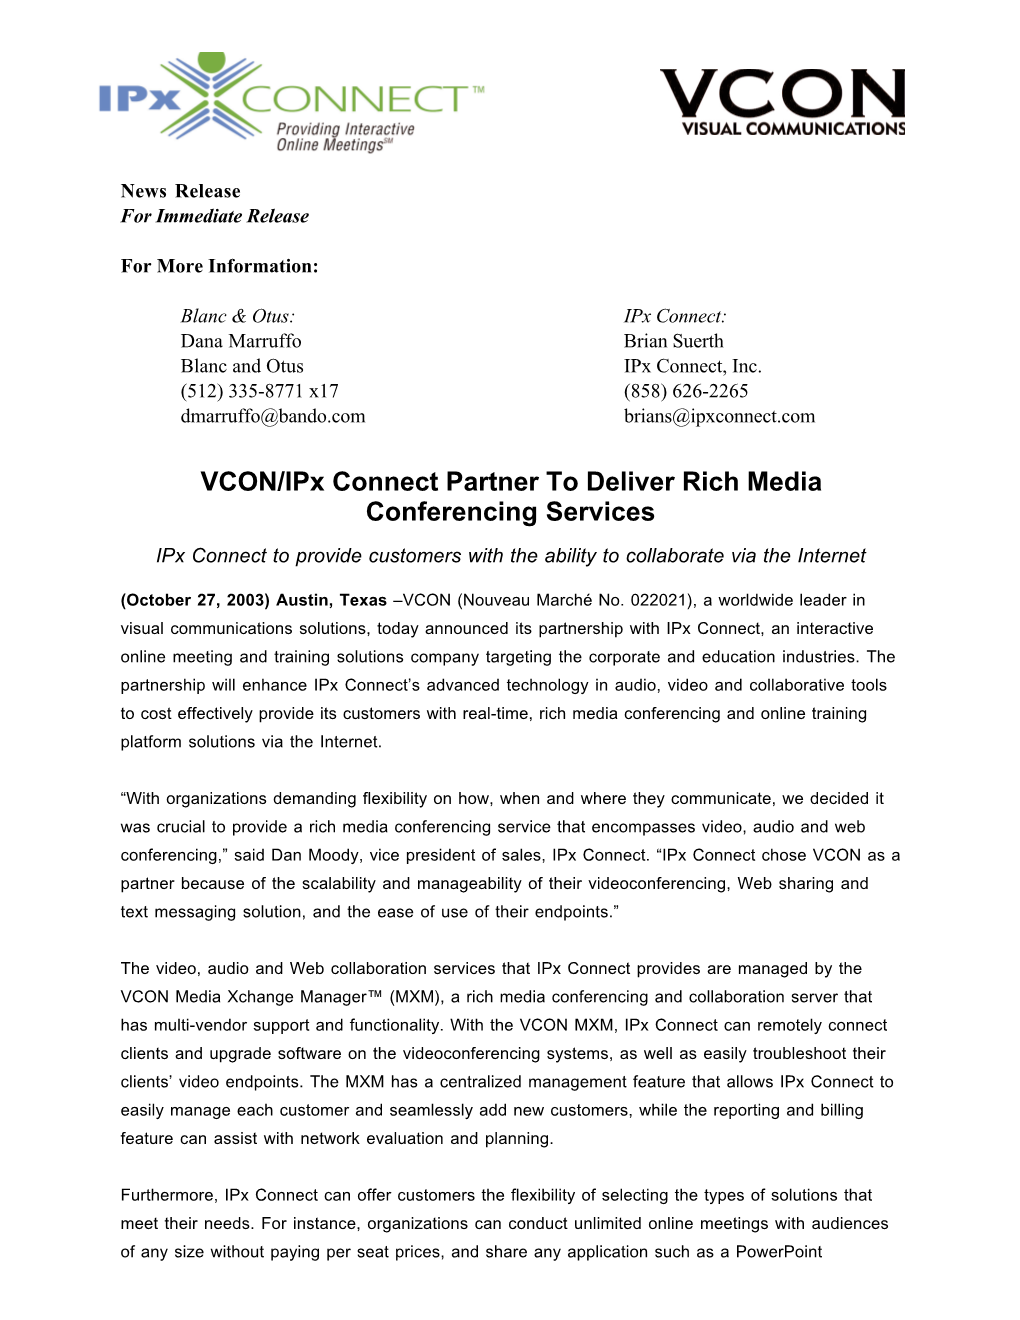 VCON/Ipx Connect Partner to Deliver Rich Media Conferencing Services